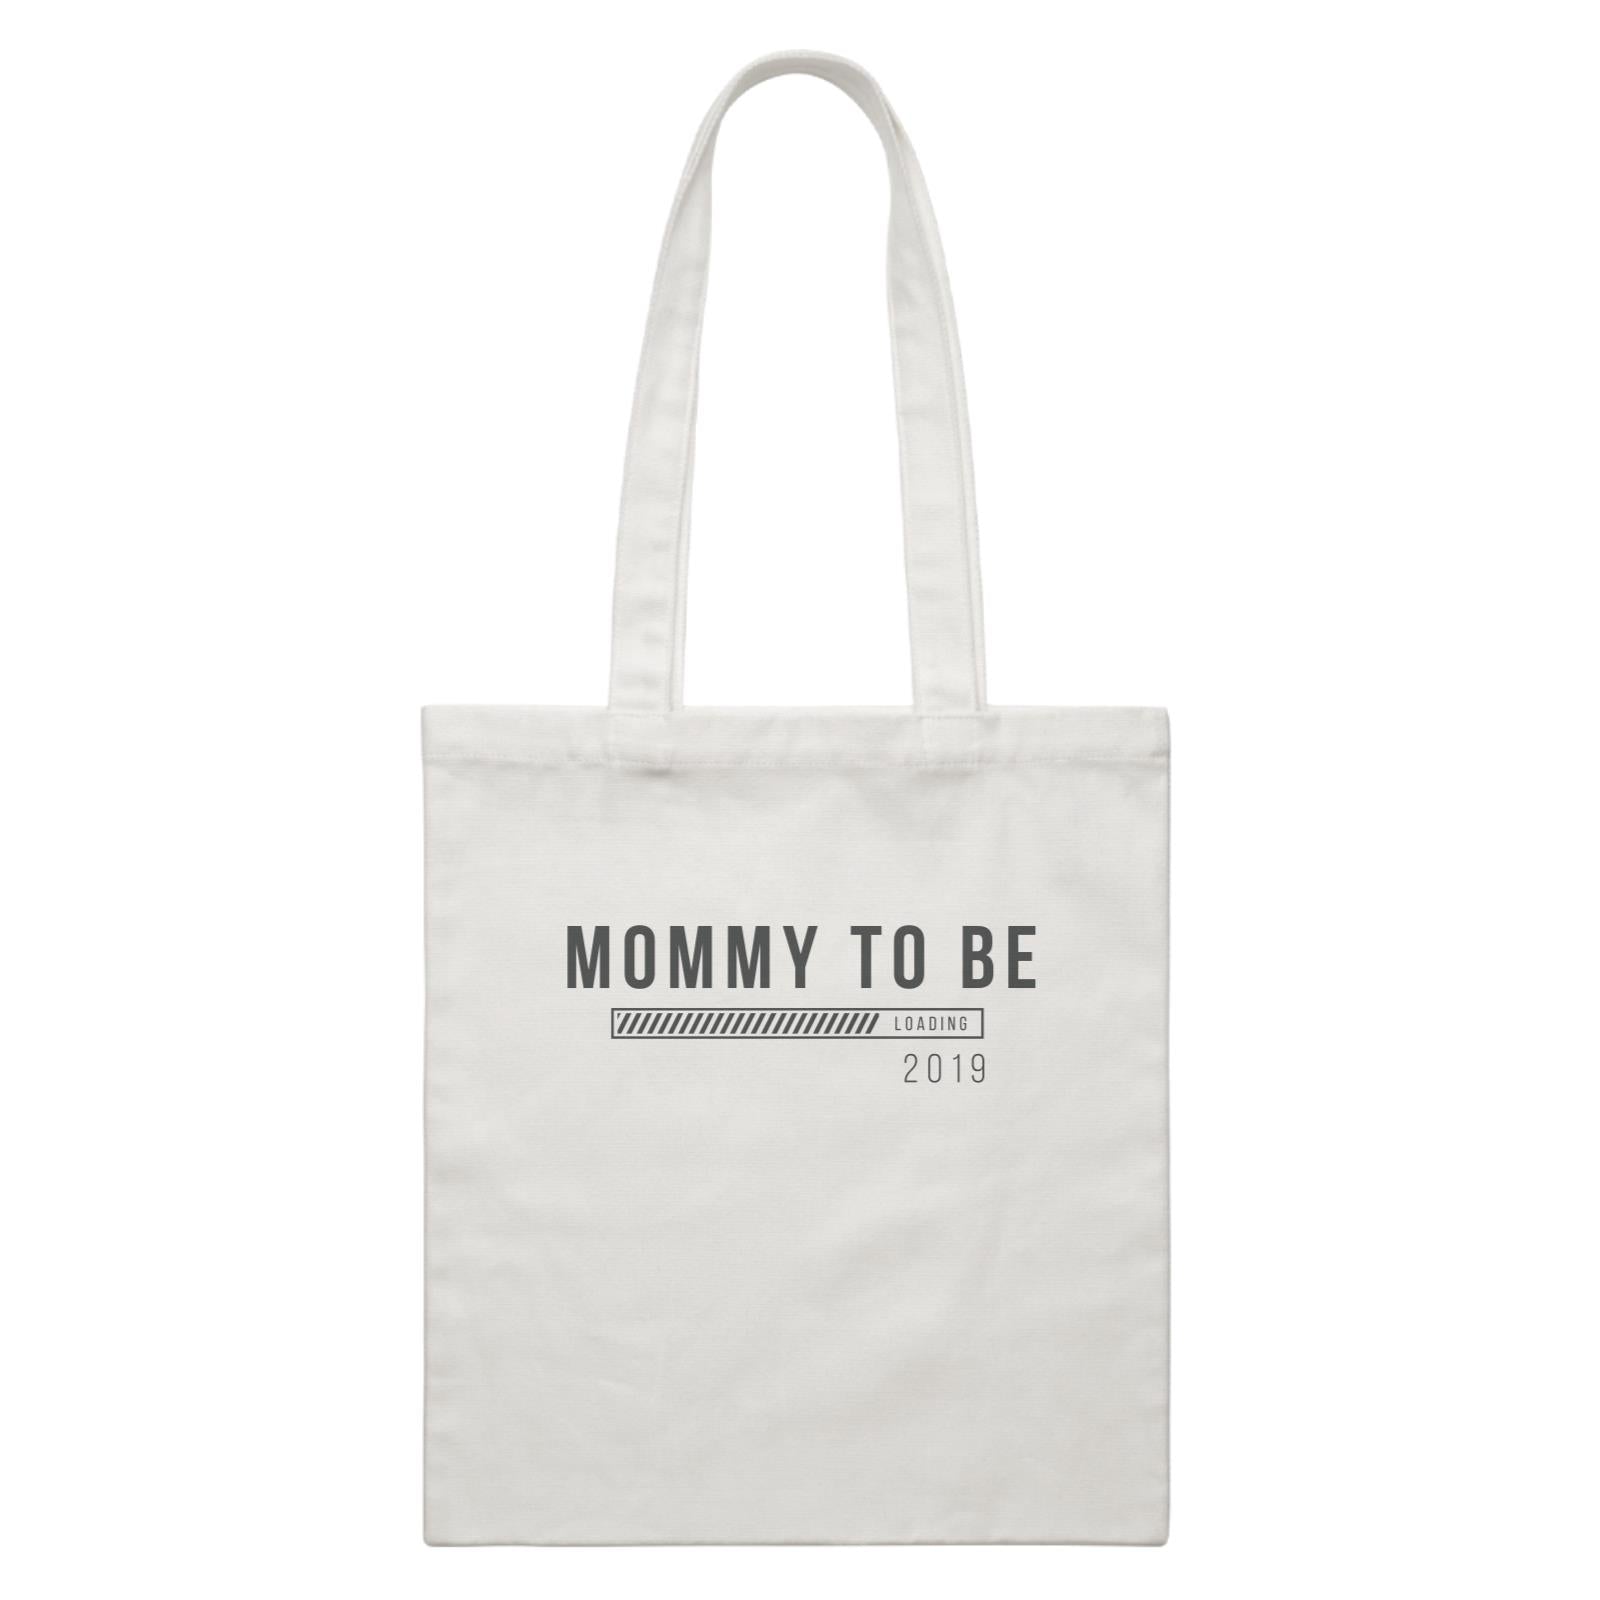 Coming Soon Family Mommy To Be Loading Add Date White Canvas Bag